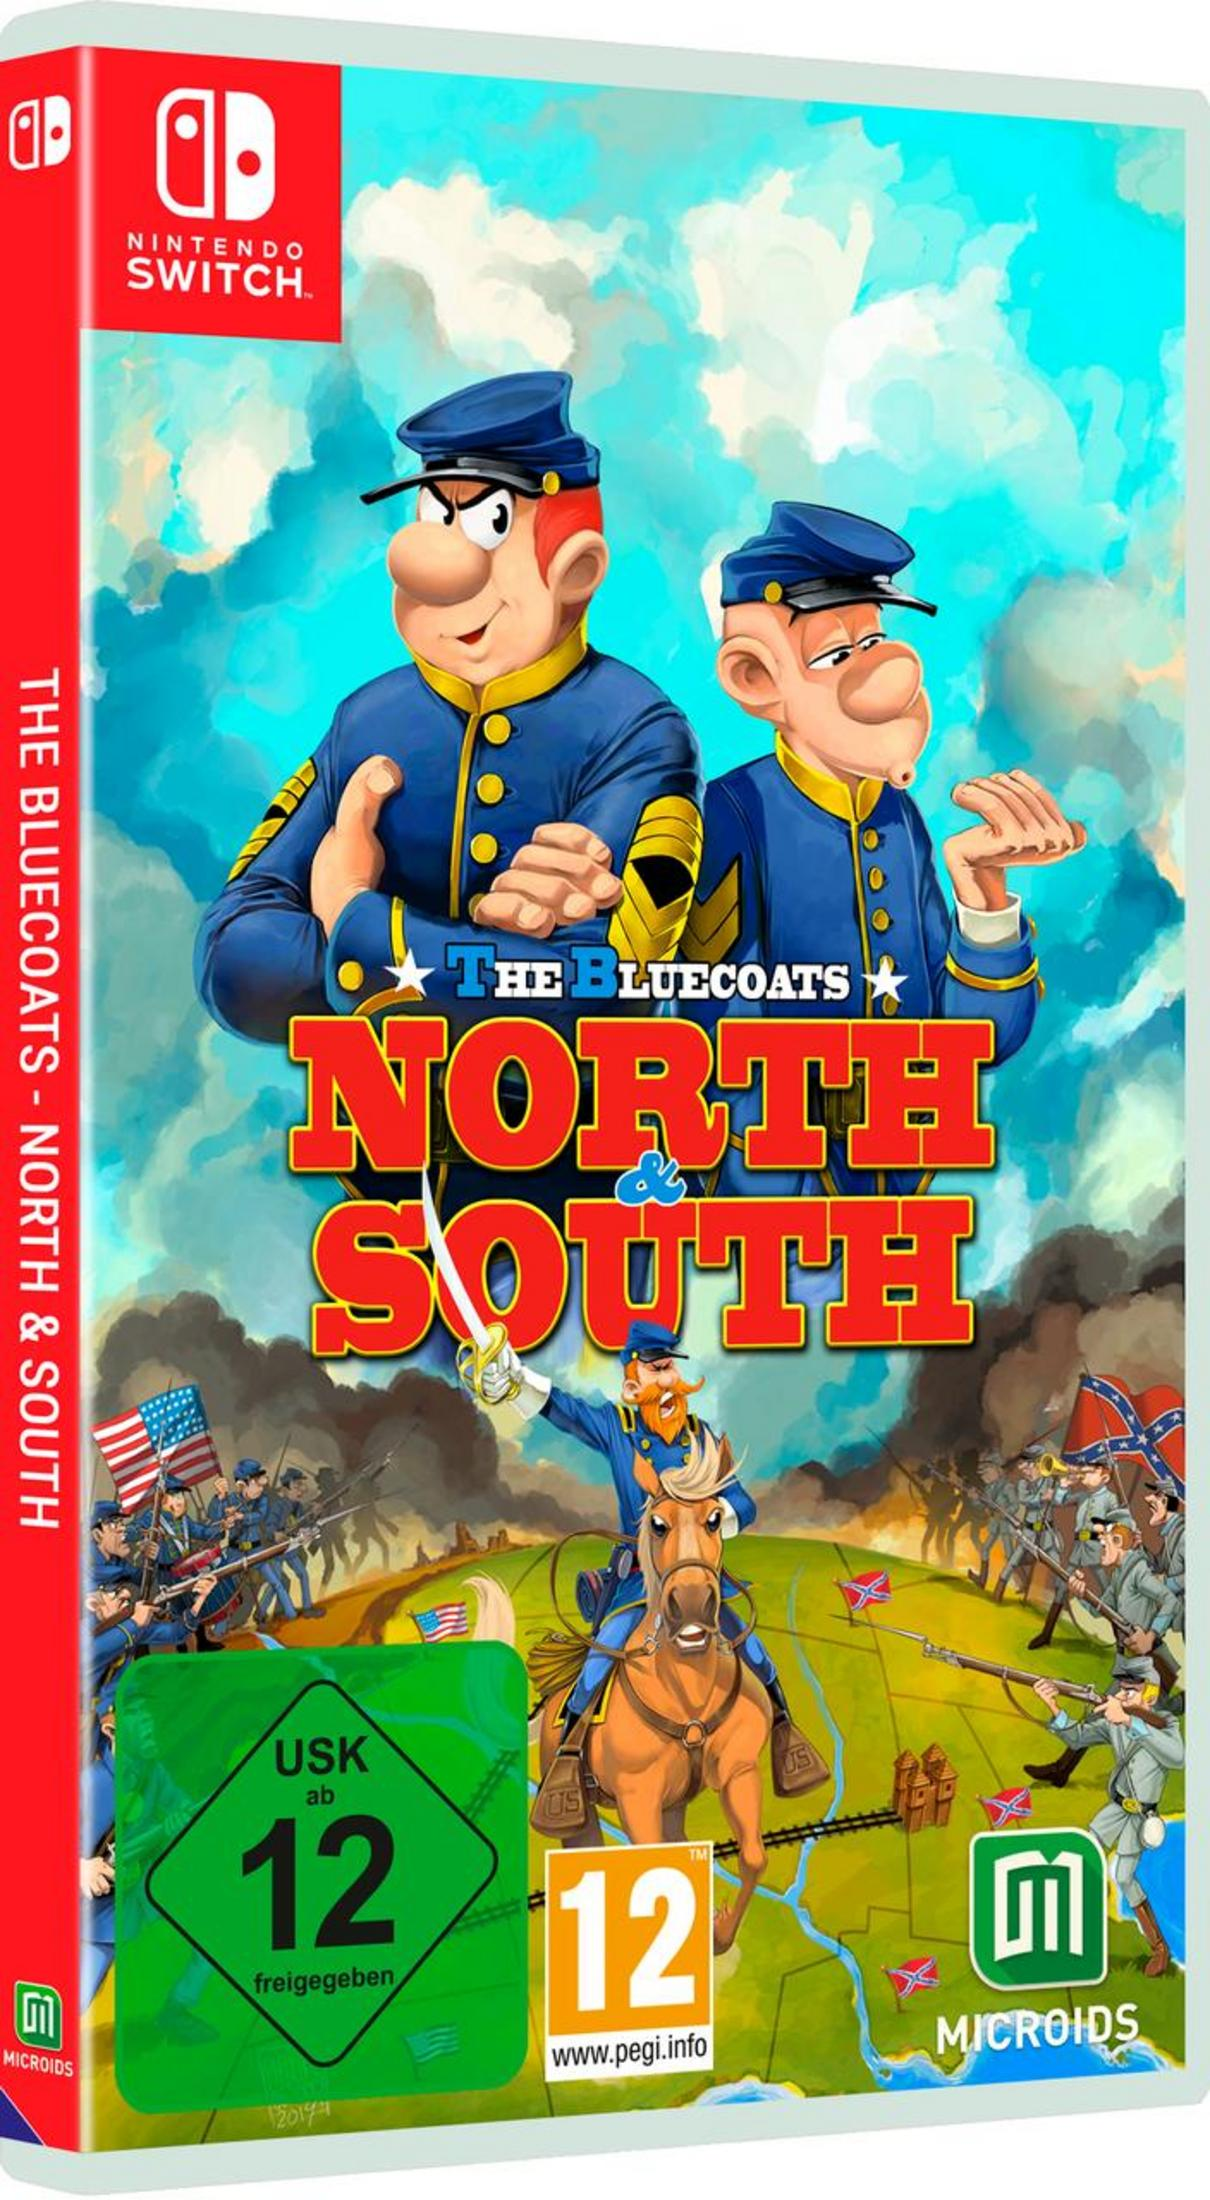 The Bluecoats: - North and Switch] [Nintendo South